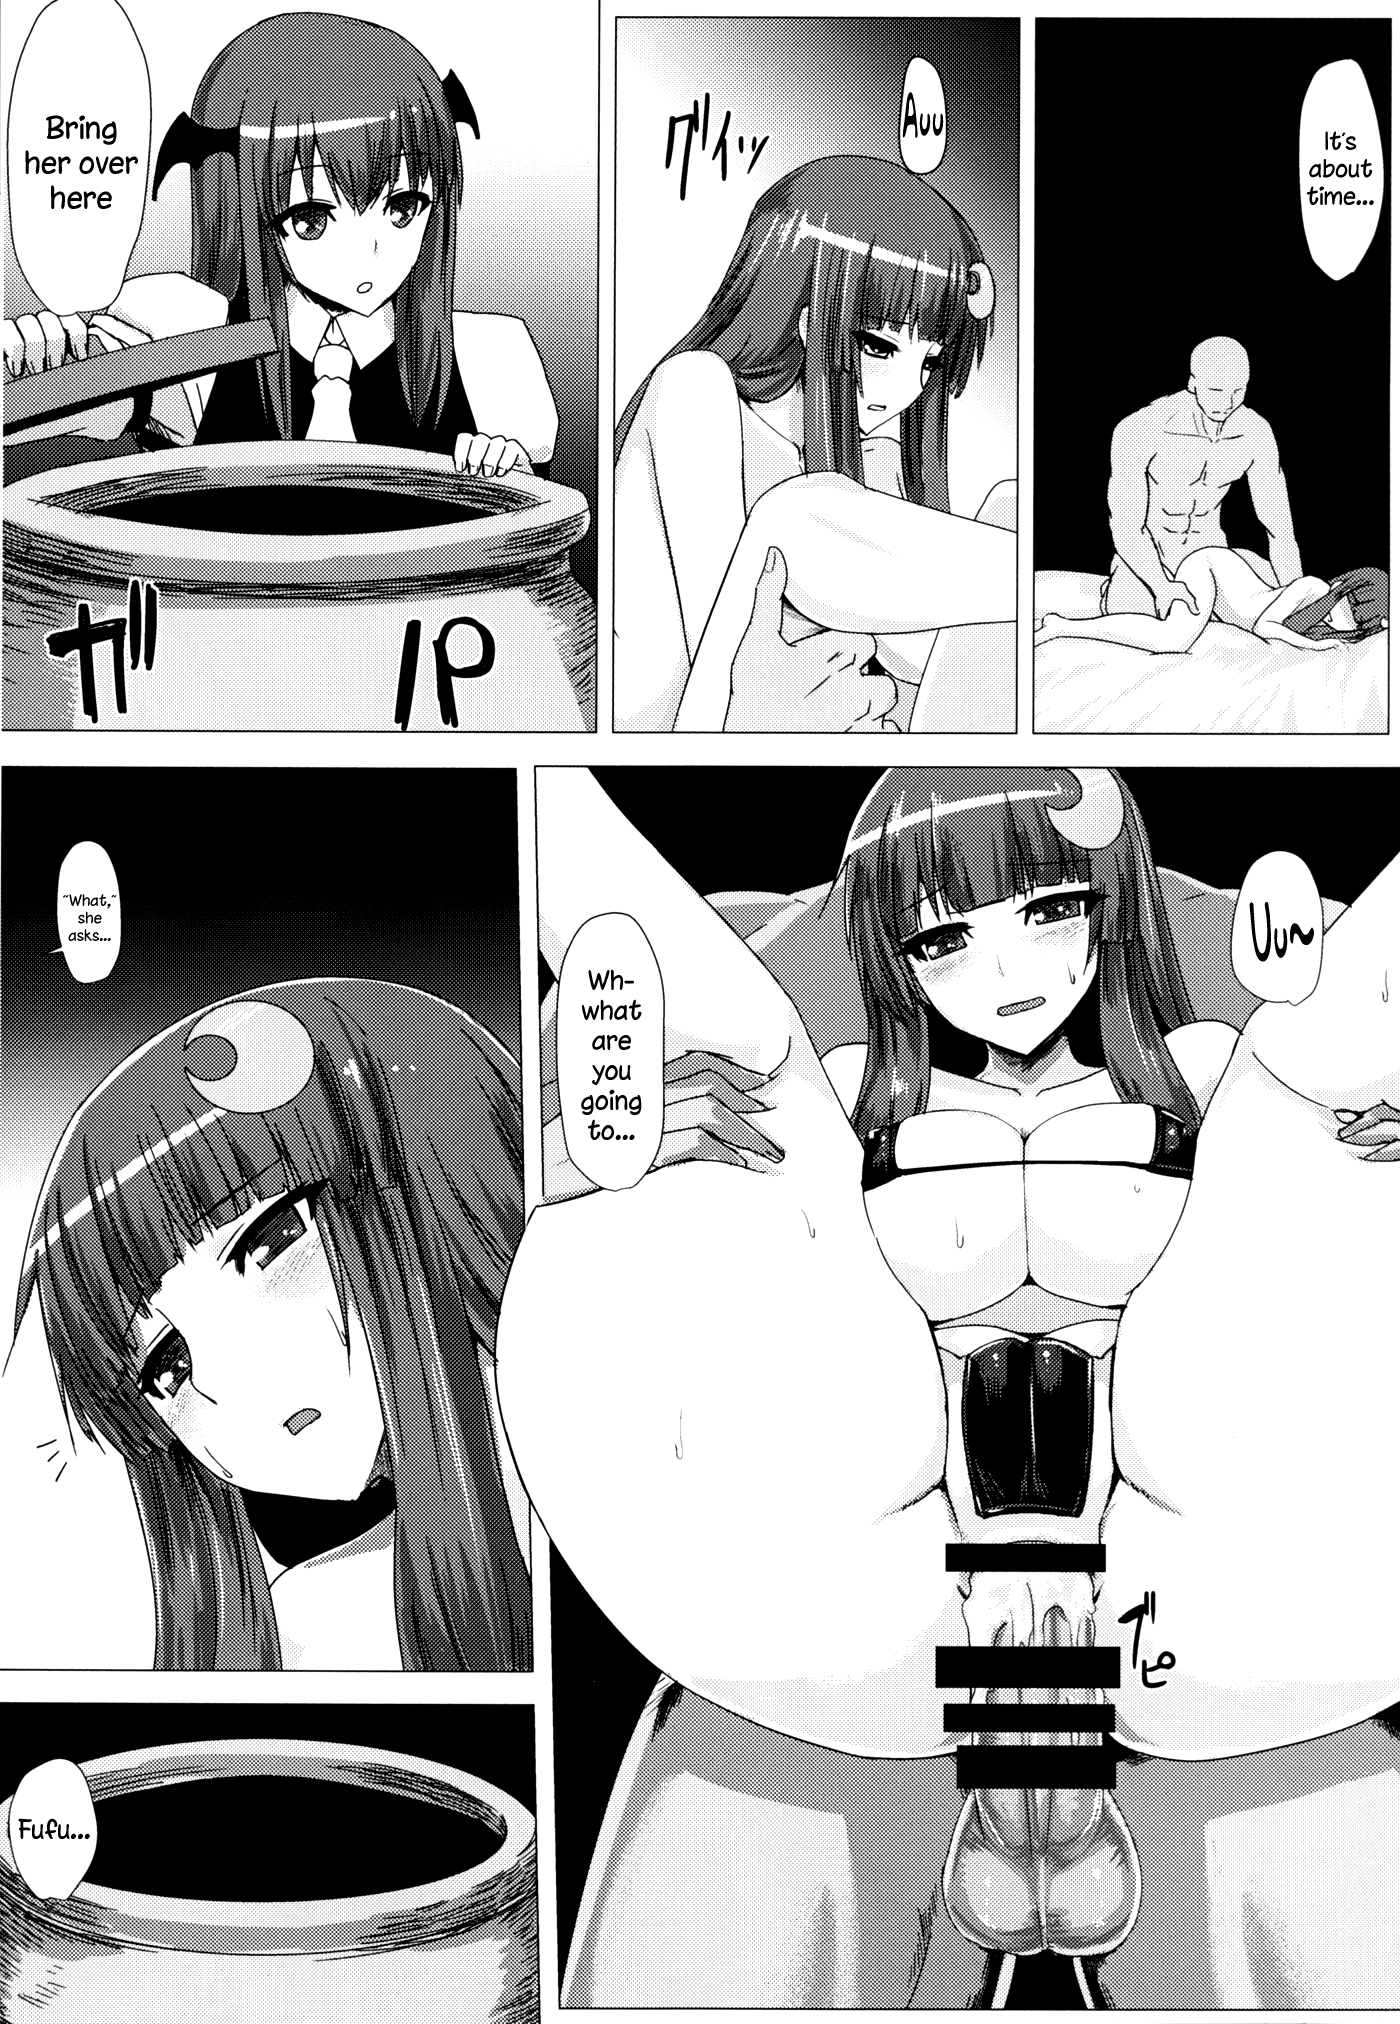 Ass Patchy Patchy hentai manga picture 9